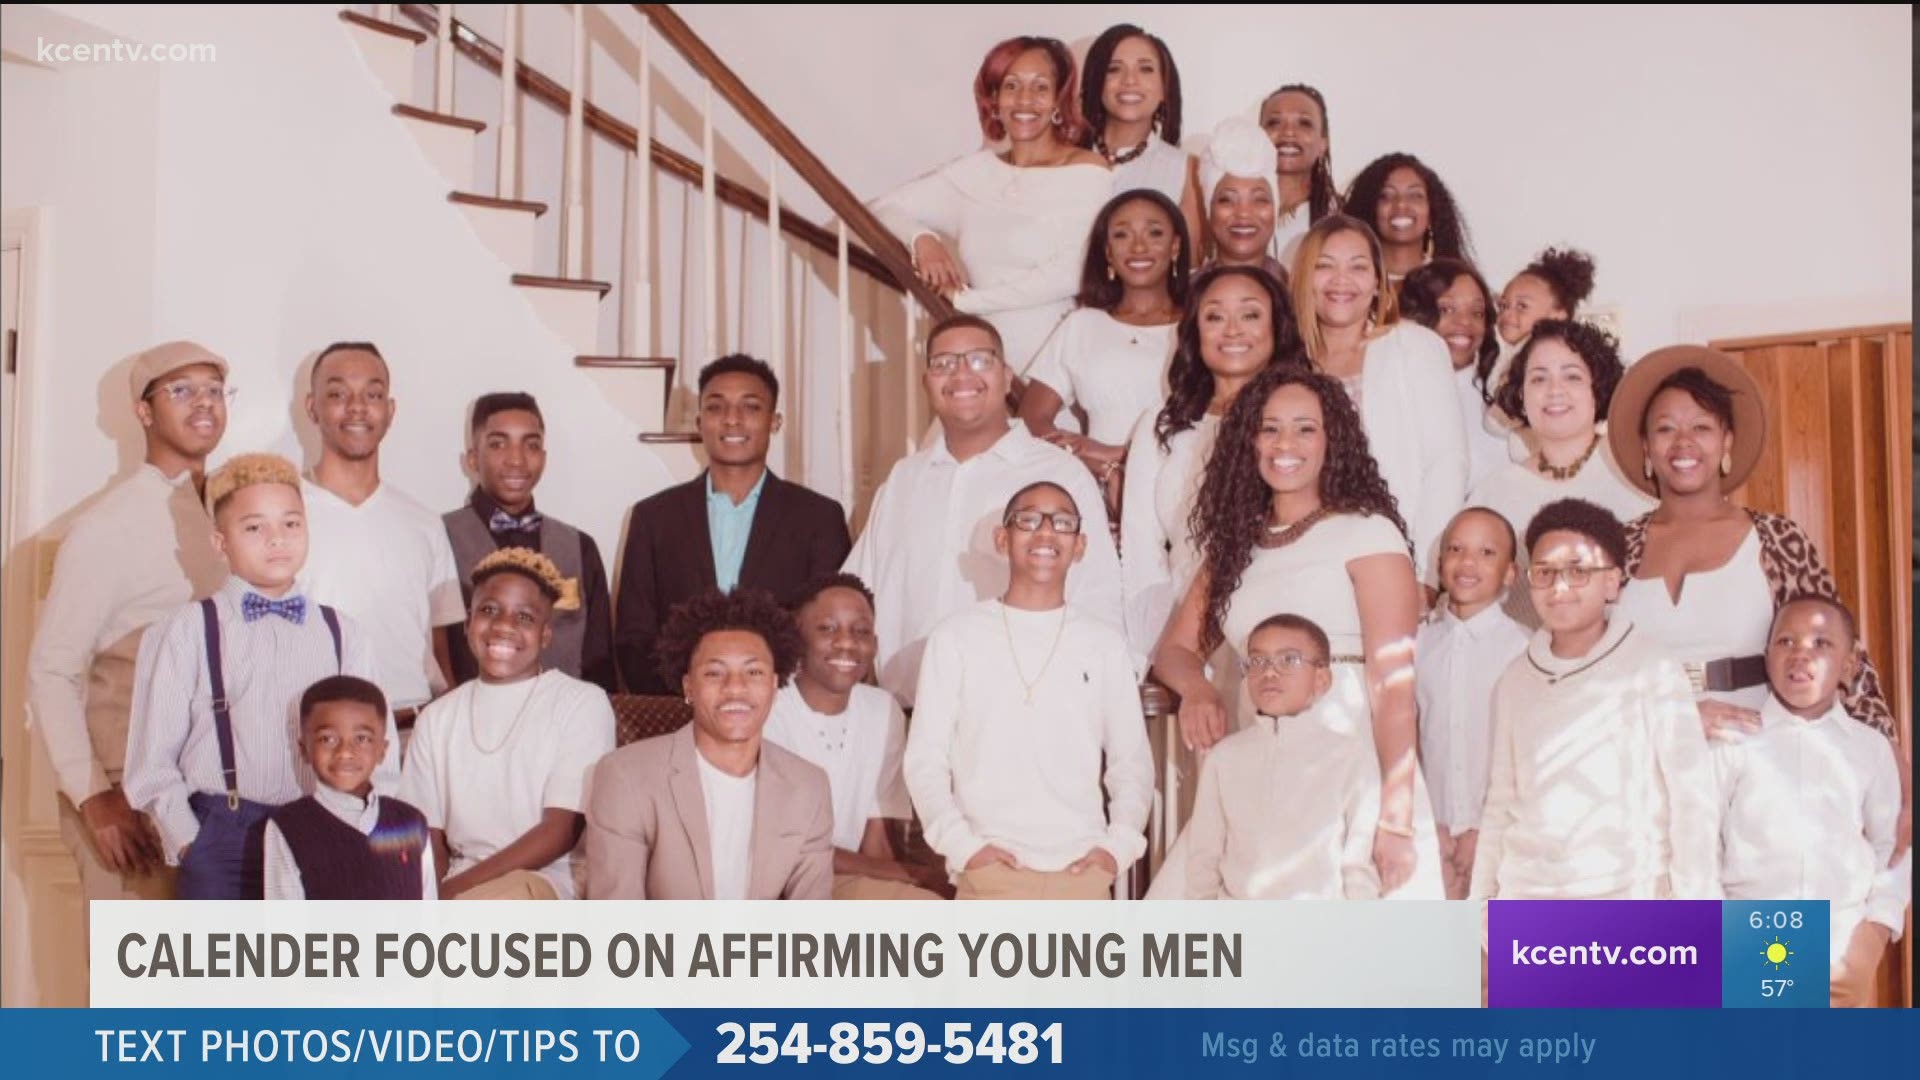 Following the death of George Floyd and ensuing social unrest, a group of mothers is looking to reassure their Black sons with a special project.